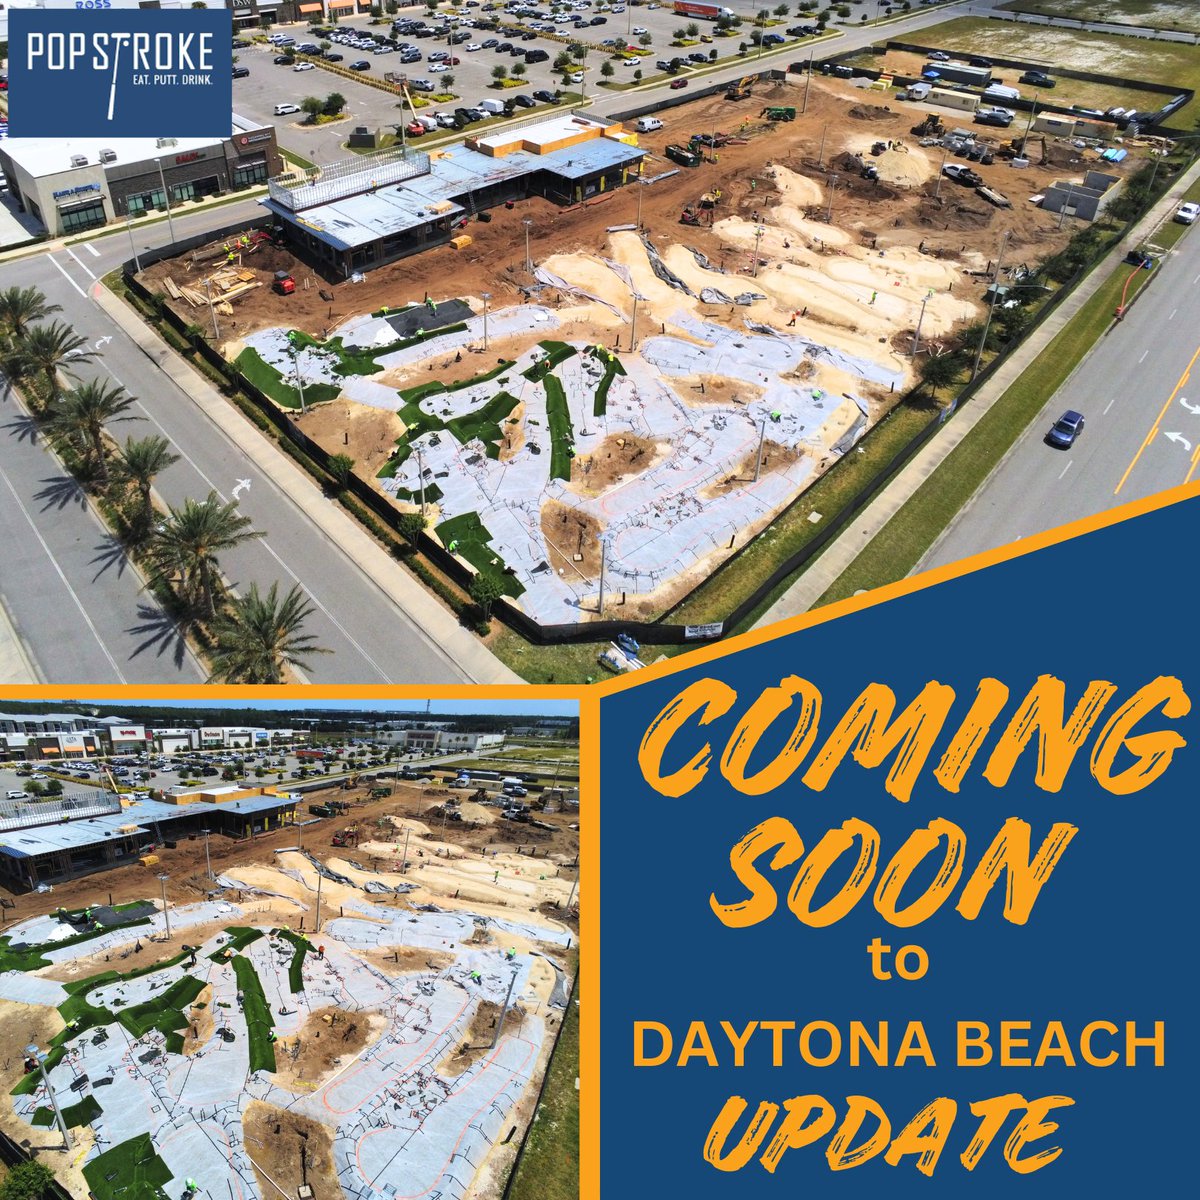 🚀 We are thrilled to share the exciting progress on PopStroke construction at Tomoka Town Center! PopStroke is a unique golf experience co-owned by Tiger Woods right here in Daytona Beach. 🏌️‍♂️ This venue features a challenging mini-golf course, a full-service restaurant, outdoor…